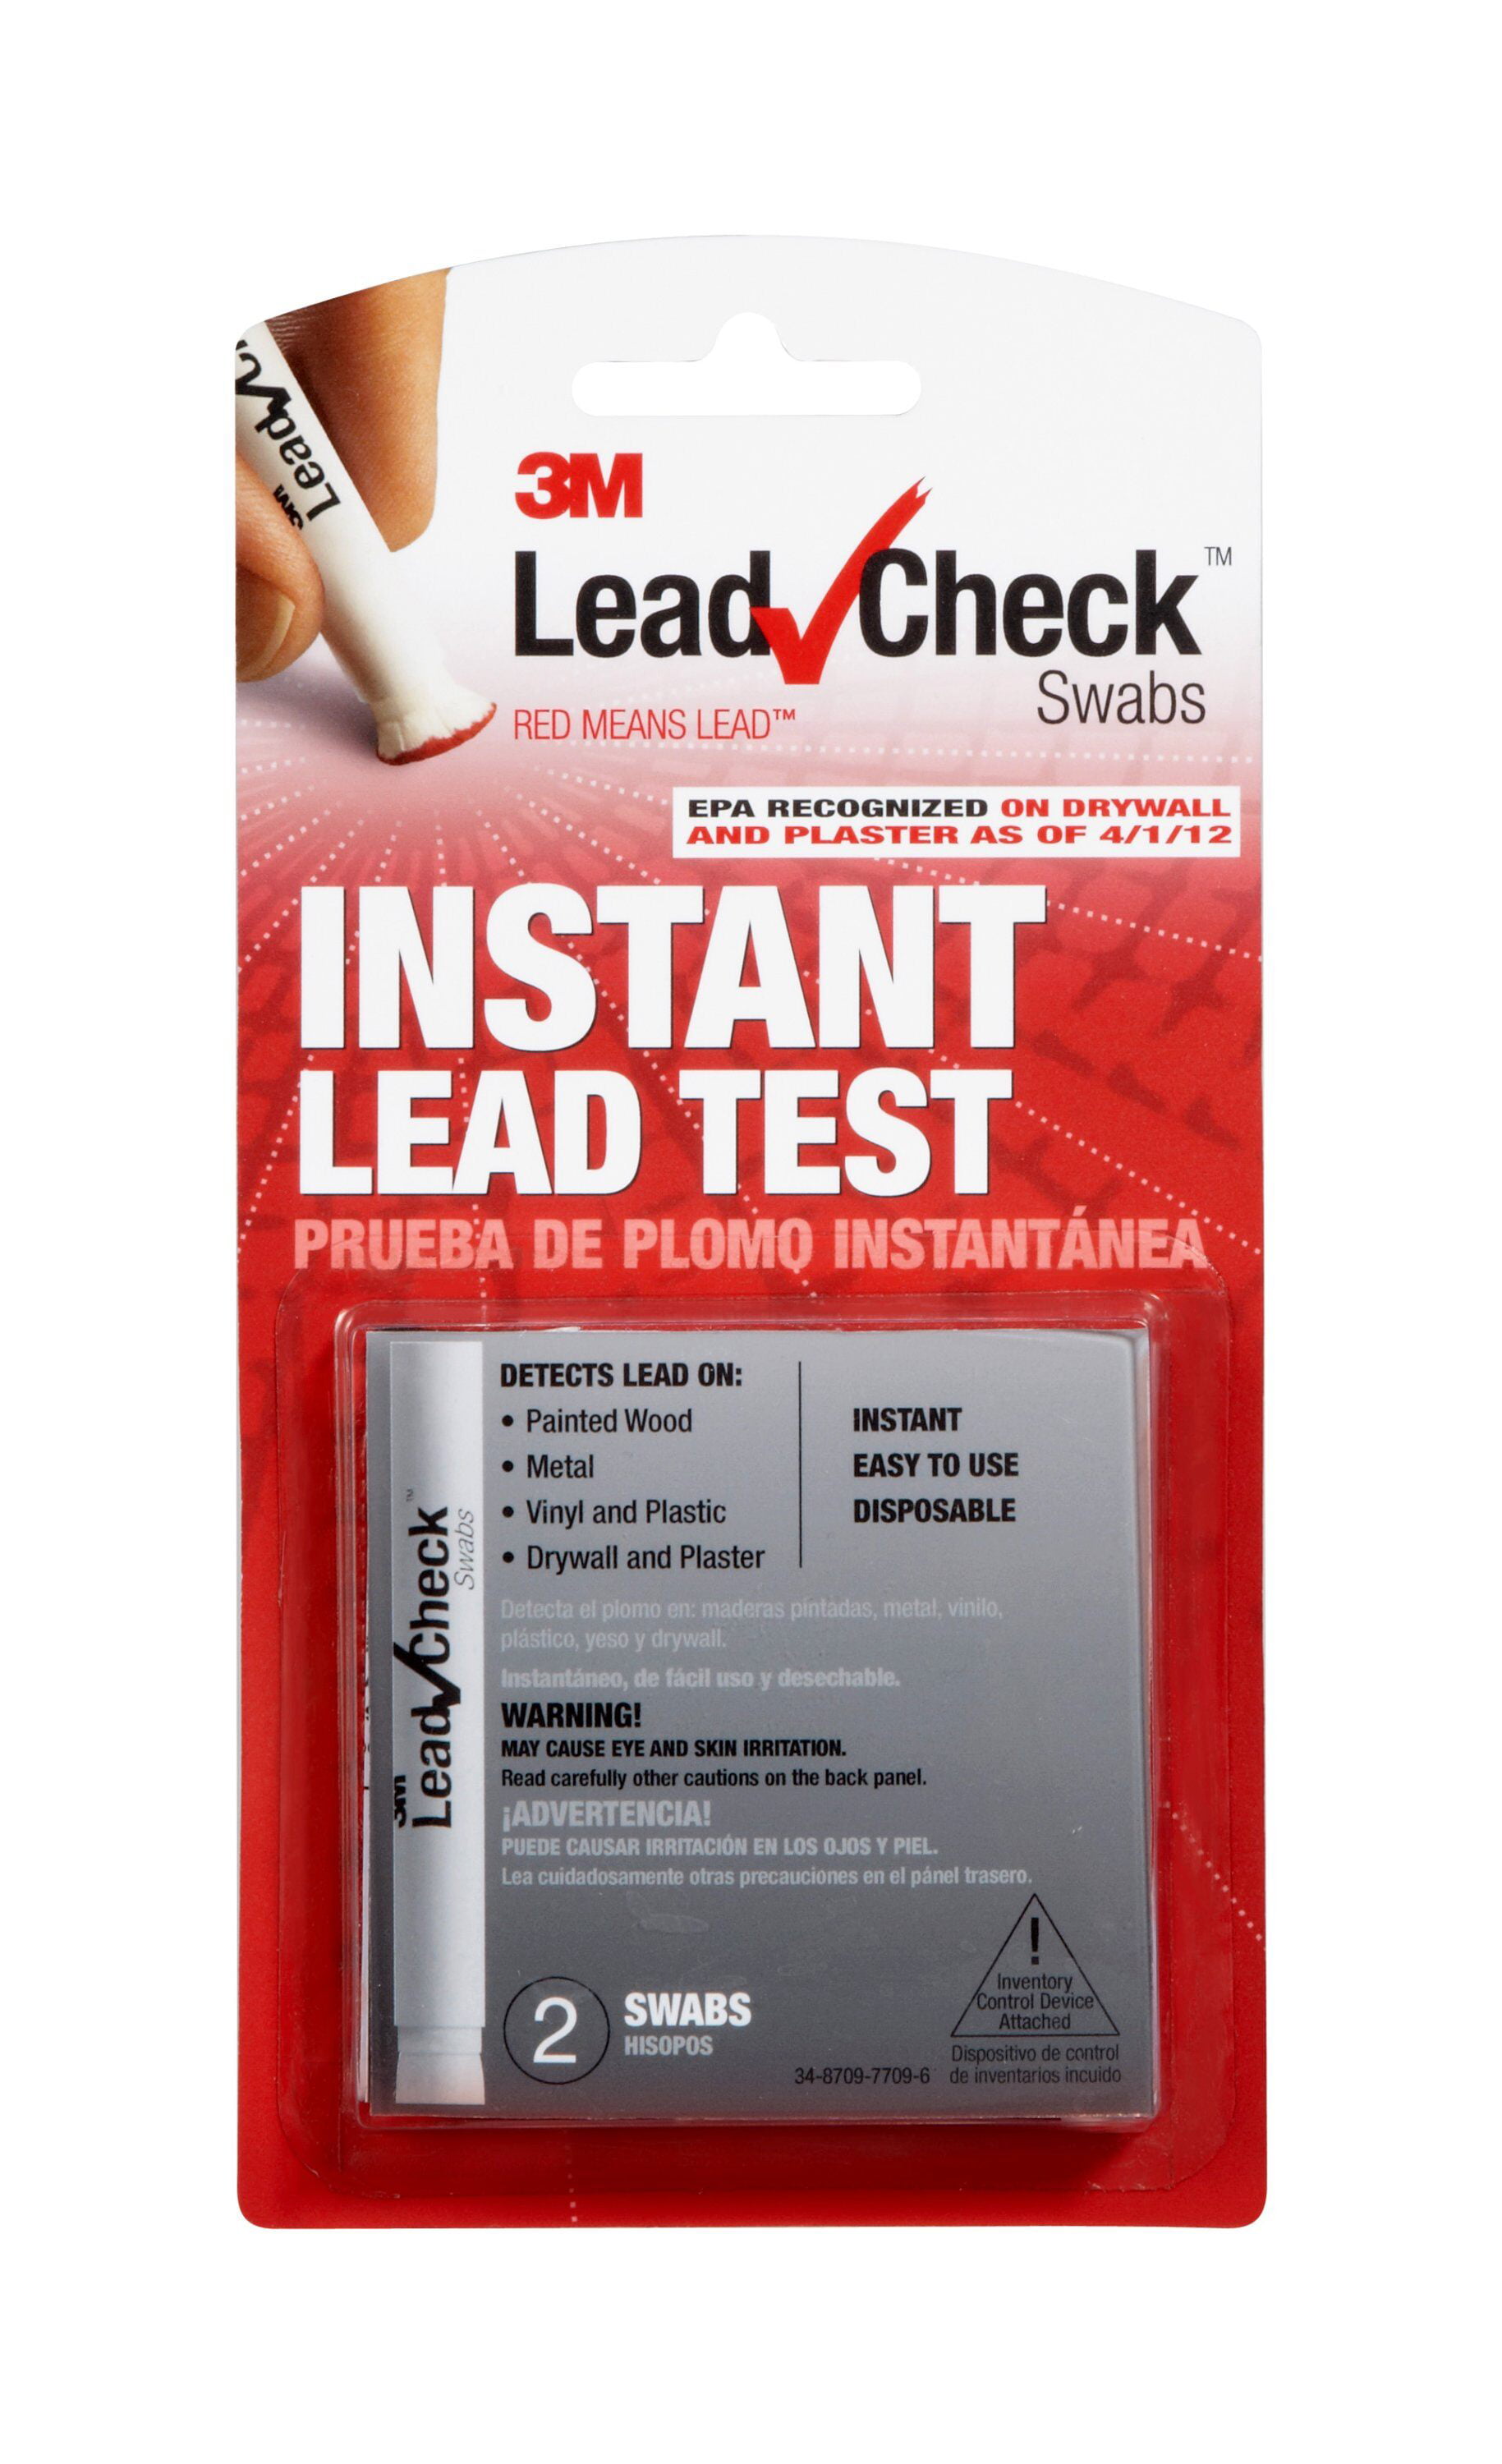 Xiaoyaoyou Test Swabs Instant Lead Test Kit For All Painted Surfaces Ceramics Dishes Metal Wood Rapid Test Results In 30 Seconds capable